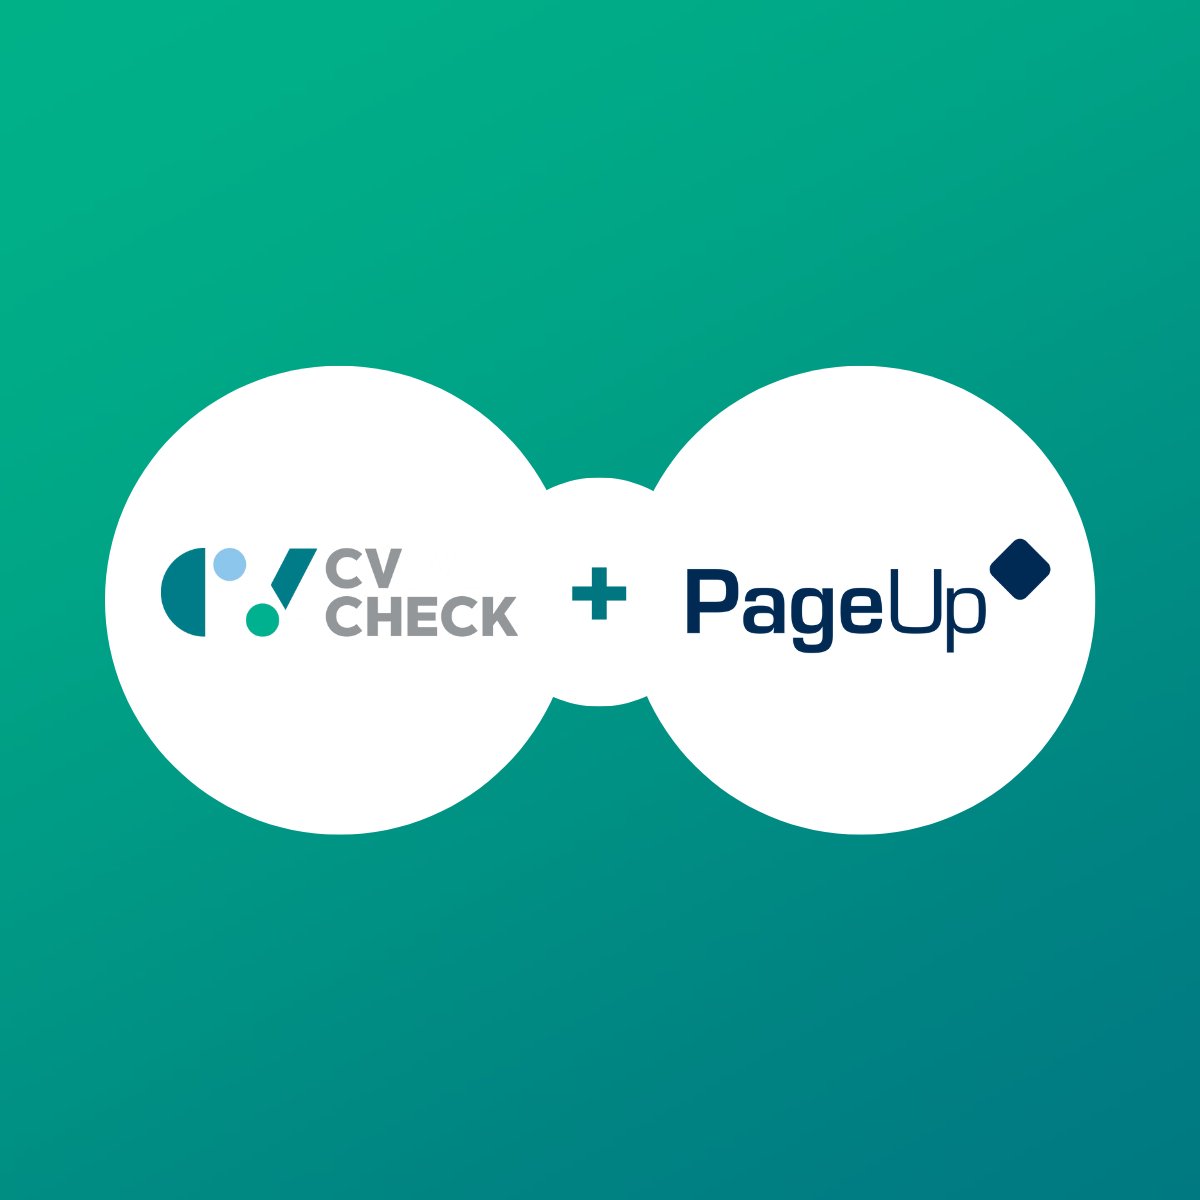 Our seamless integration with PageUp helps you perform efficient background checks on potential candidates all within the PageUp platform. Learn more about our solutions and integration with PageUp here: cvcheck.com/integration-pa…

#BackgroundChecks #PreEmployment #CVCheck #PageUp